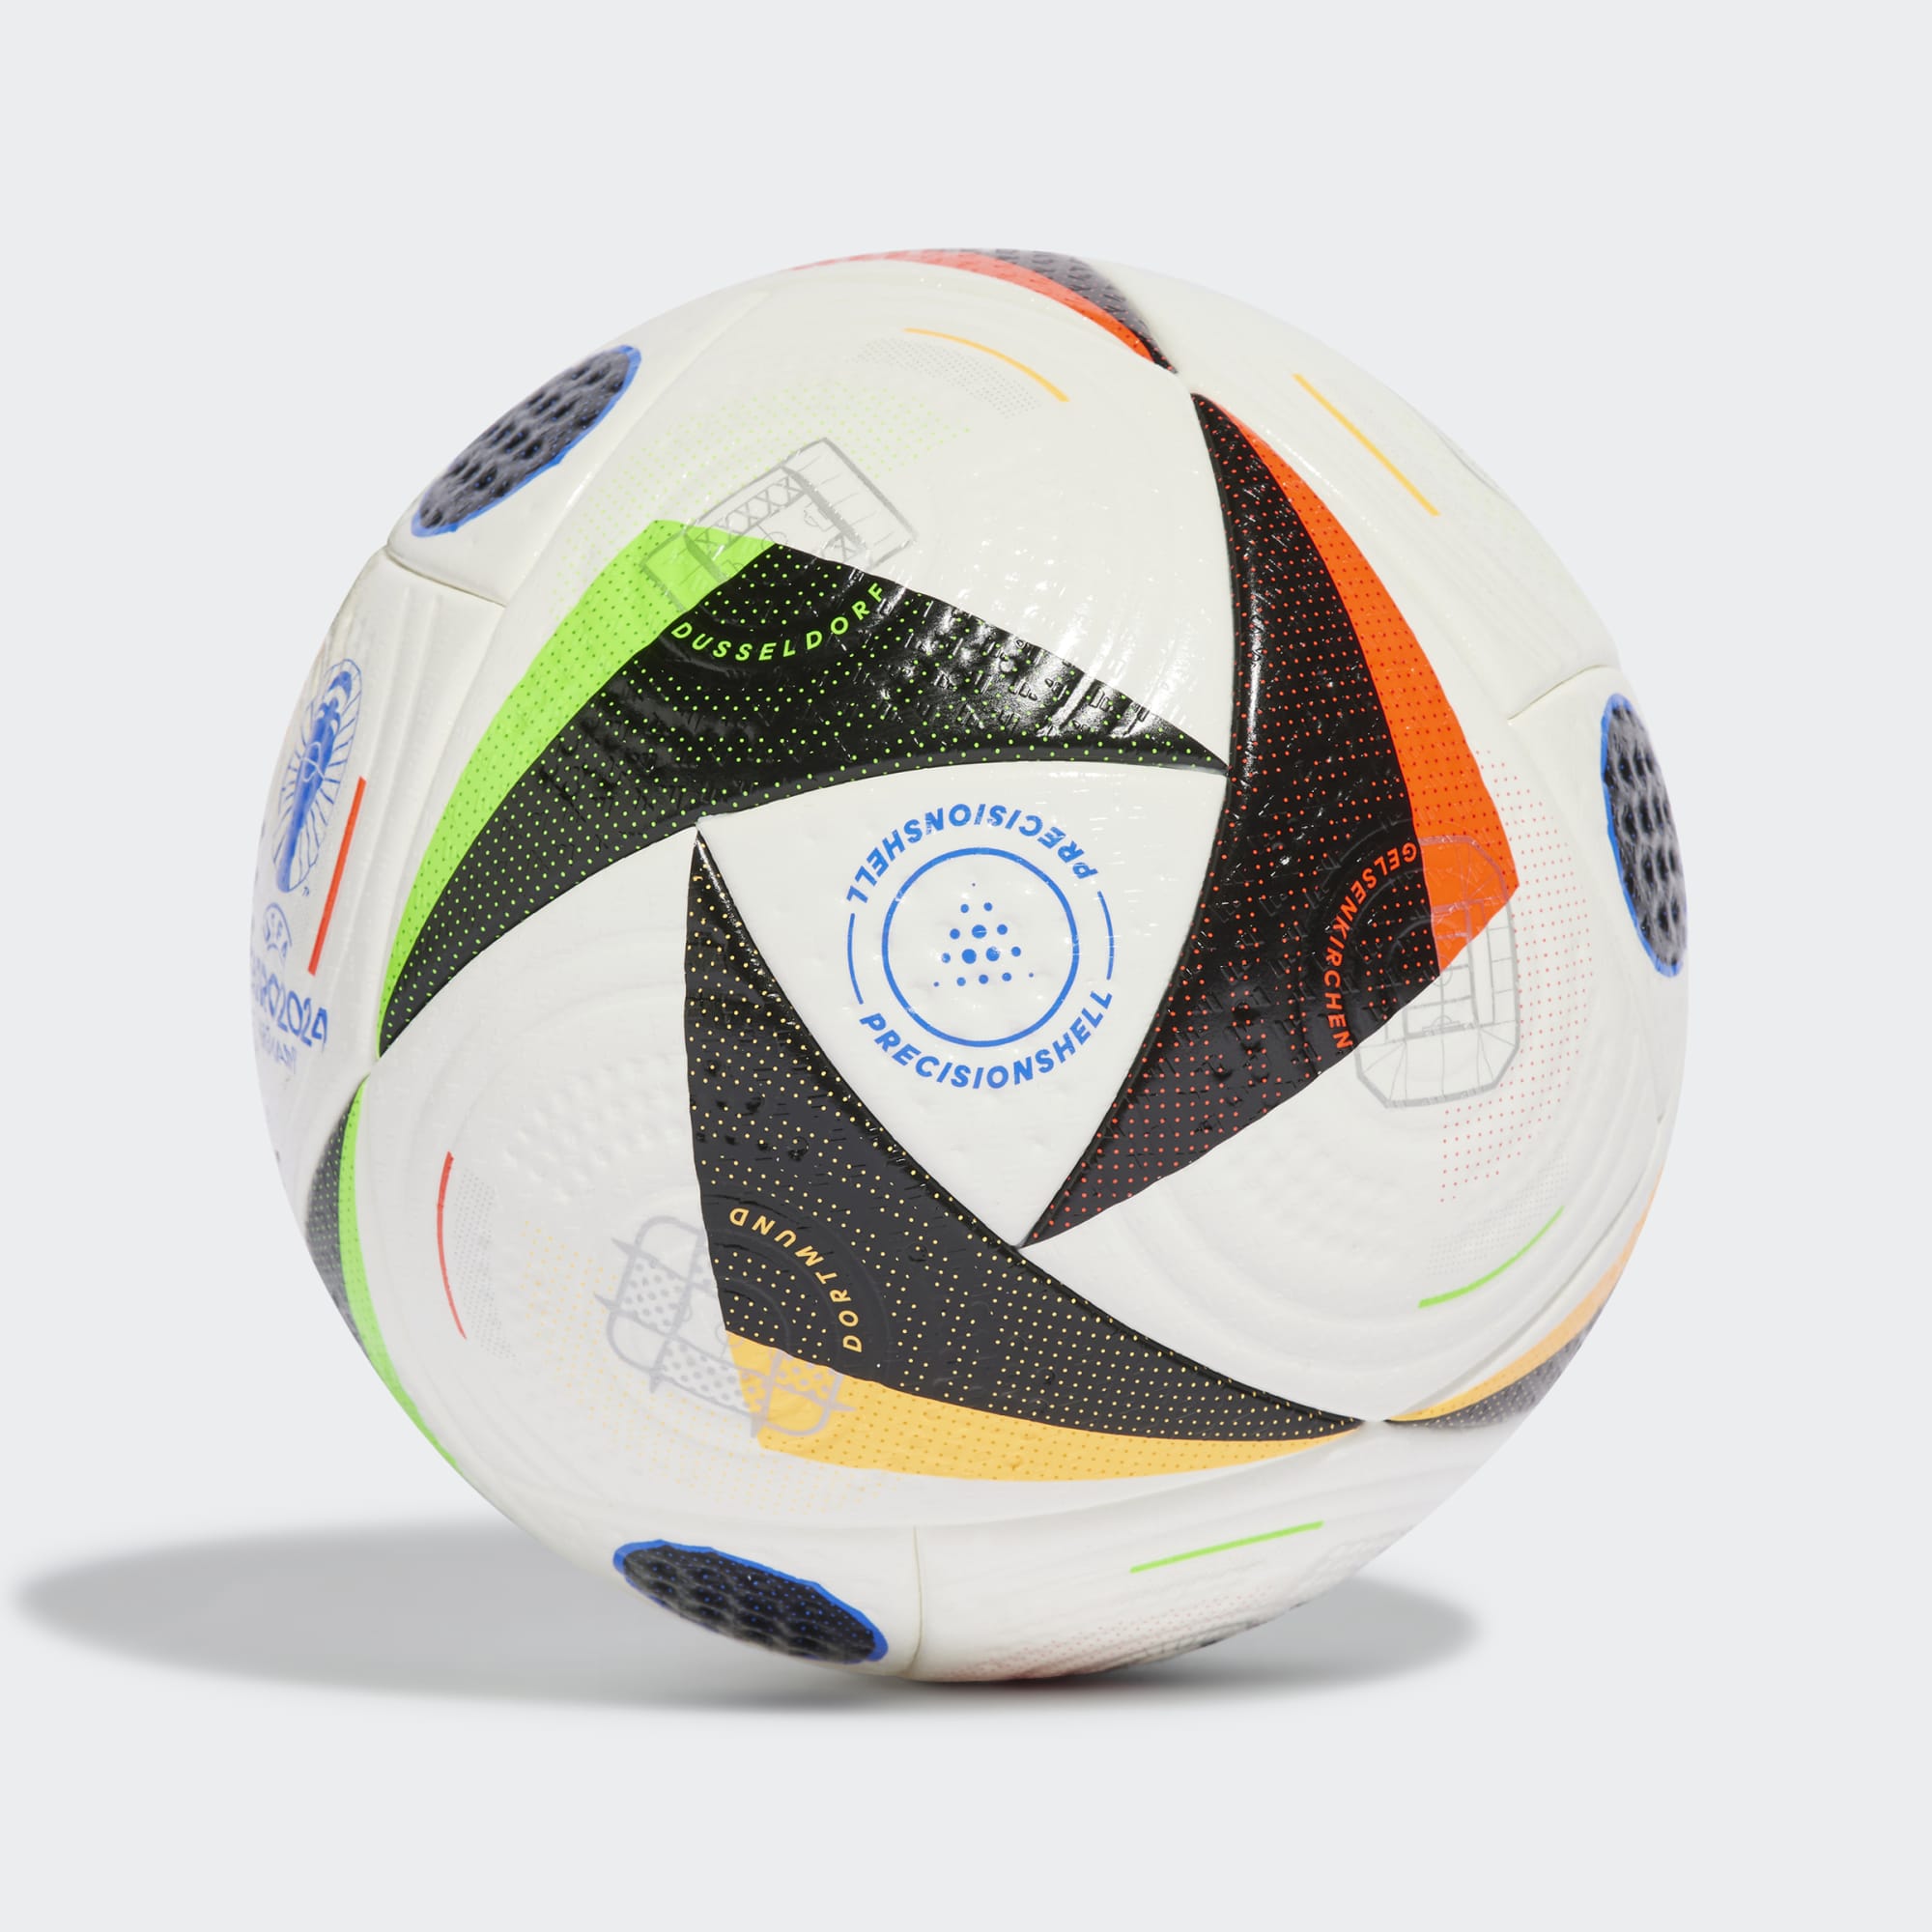 Adidas® EURO24 Pro, Official Match Ball of UEFA EURO 2024 in Germany